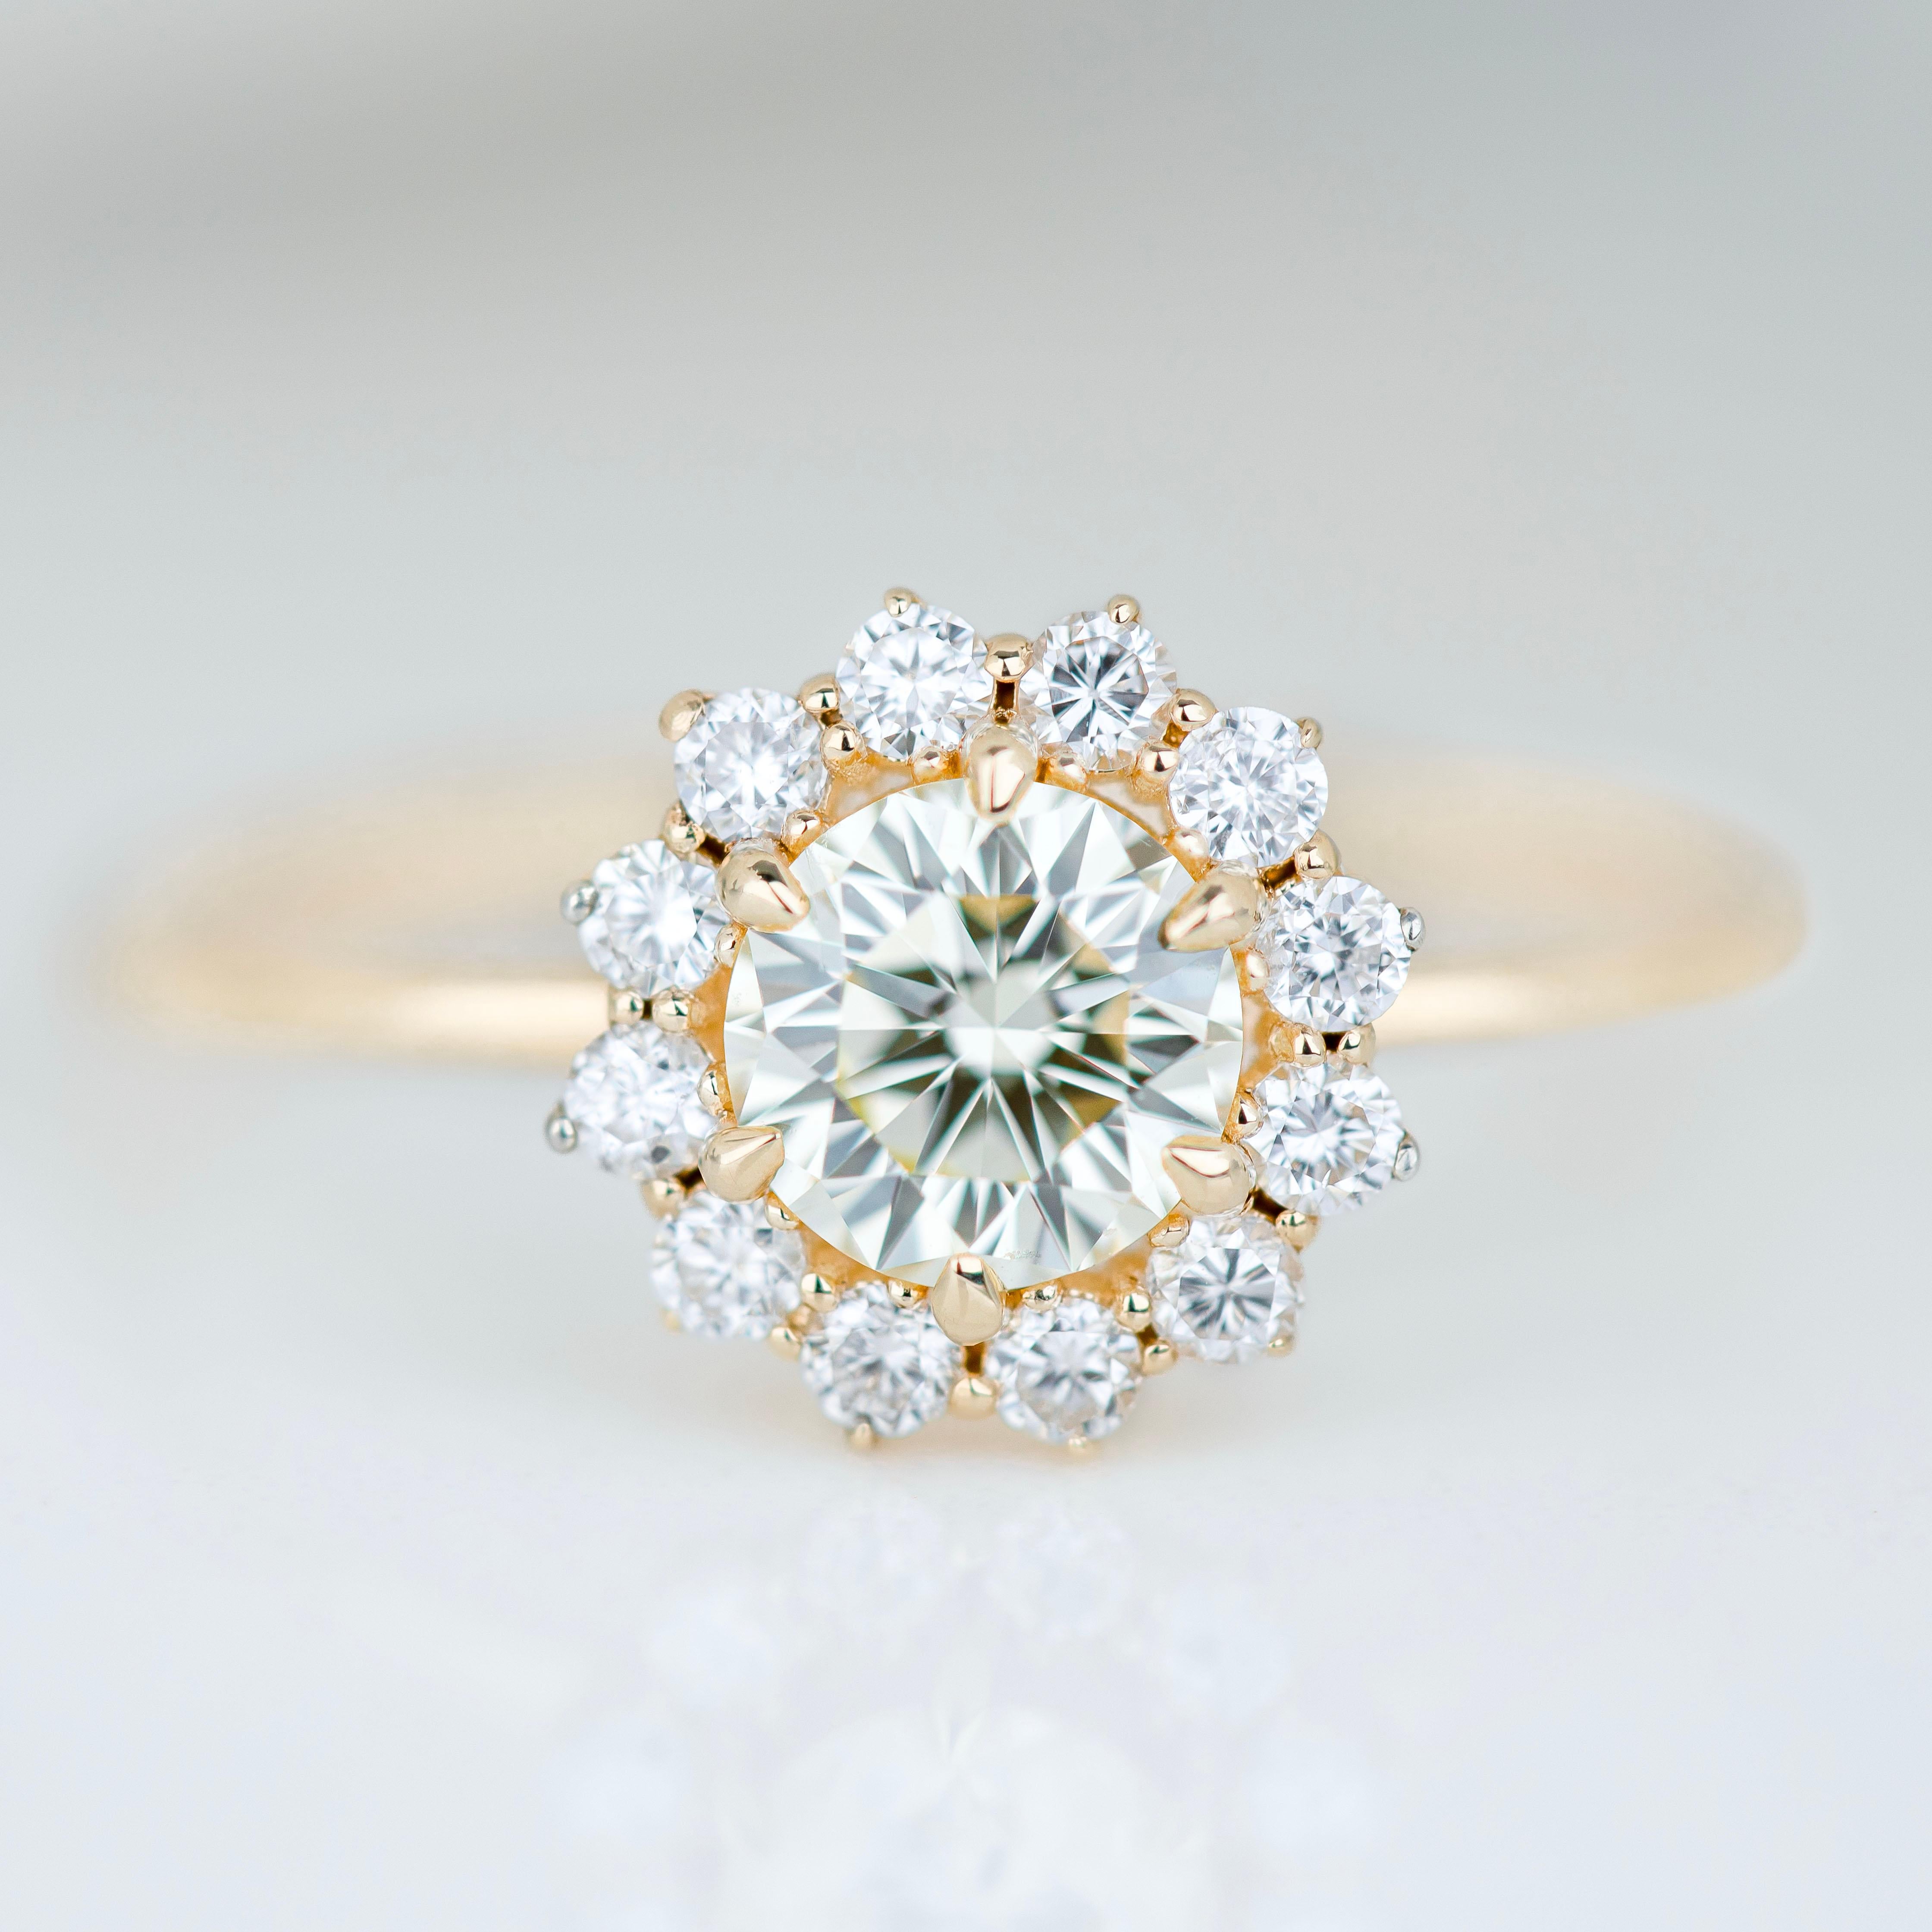 Sunflower Custom Dizayn Diamond Ring, Engagement Ring and Entourage Ring

Gold metal: 14k Yellow Gold
Diamond Shape: Round Cut
Main Stone: 1.25 ct Ct
R Color-VVS2 Clarity
Side Stones: 0.26 Ct Round Diamond / E Color - VS Clarity
Total Carat Weight: